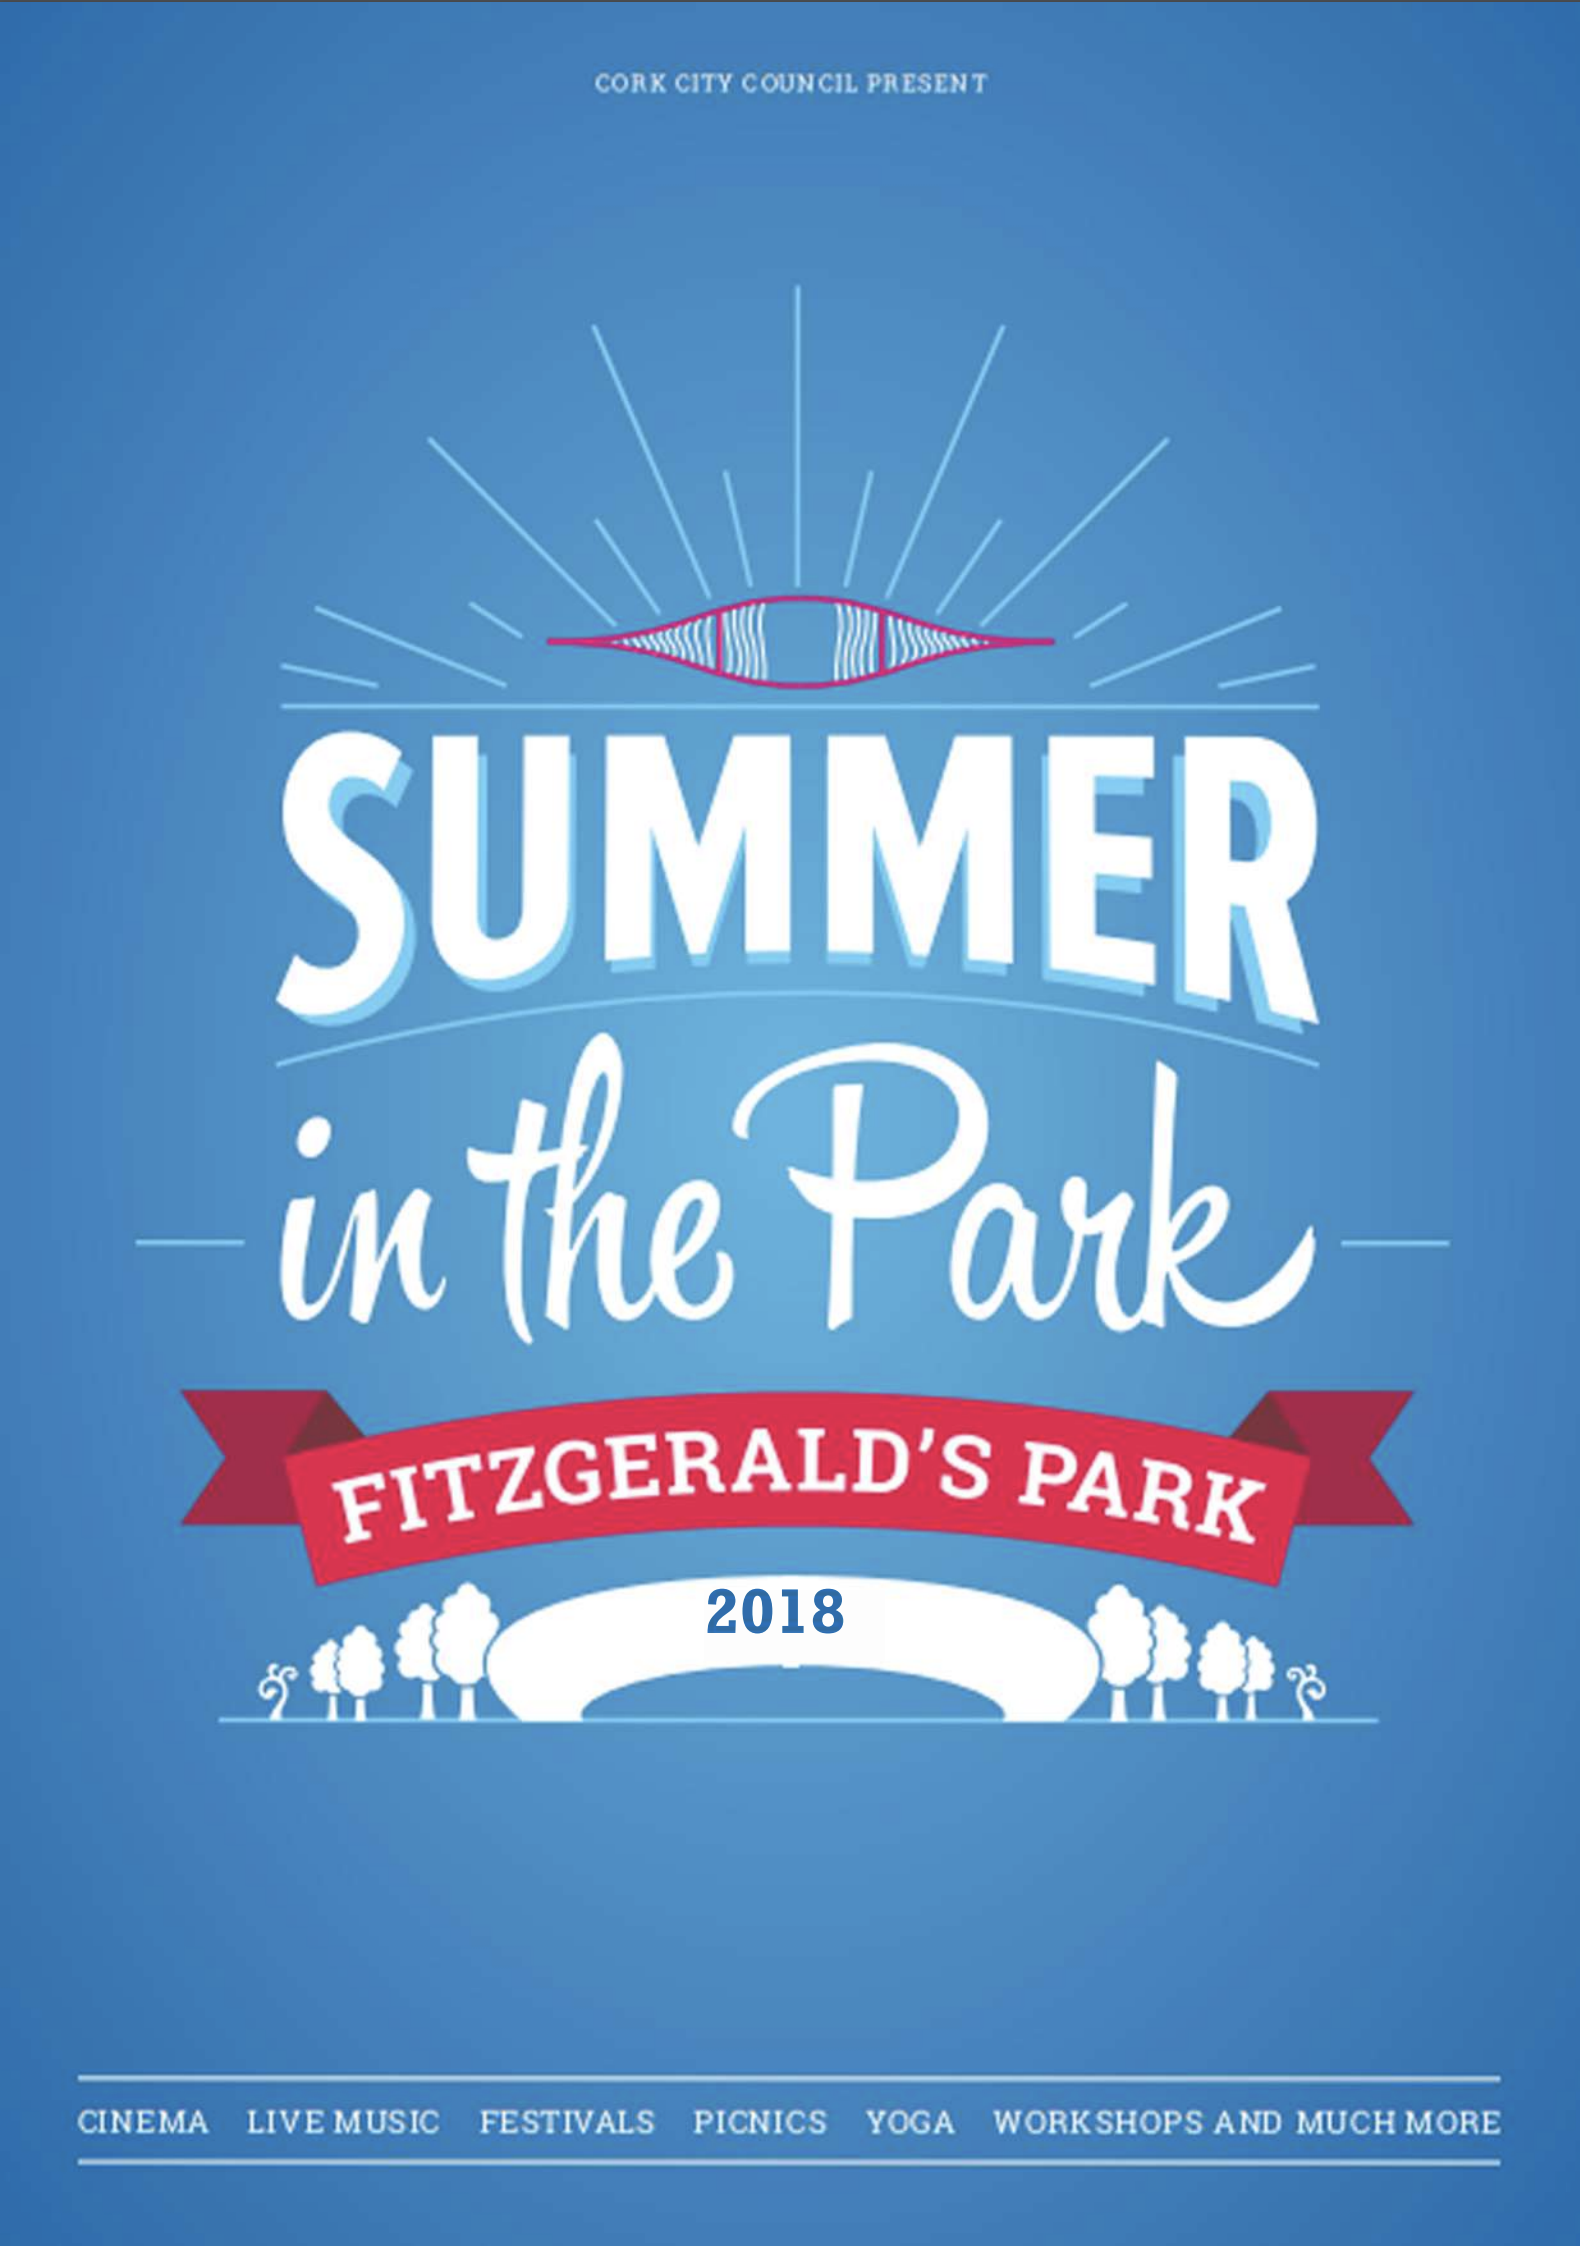 Summer in the Park- Fitzgerald's Park